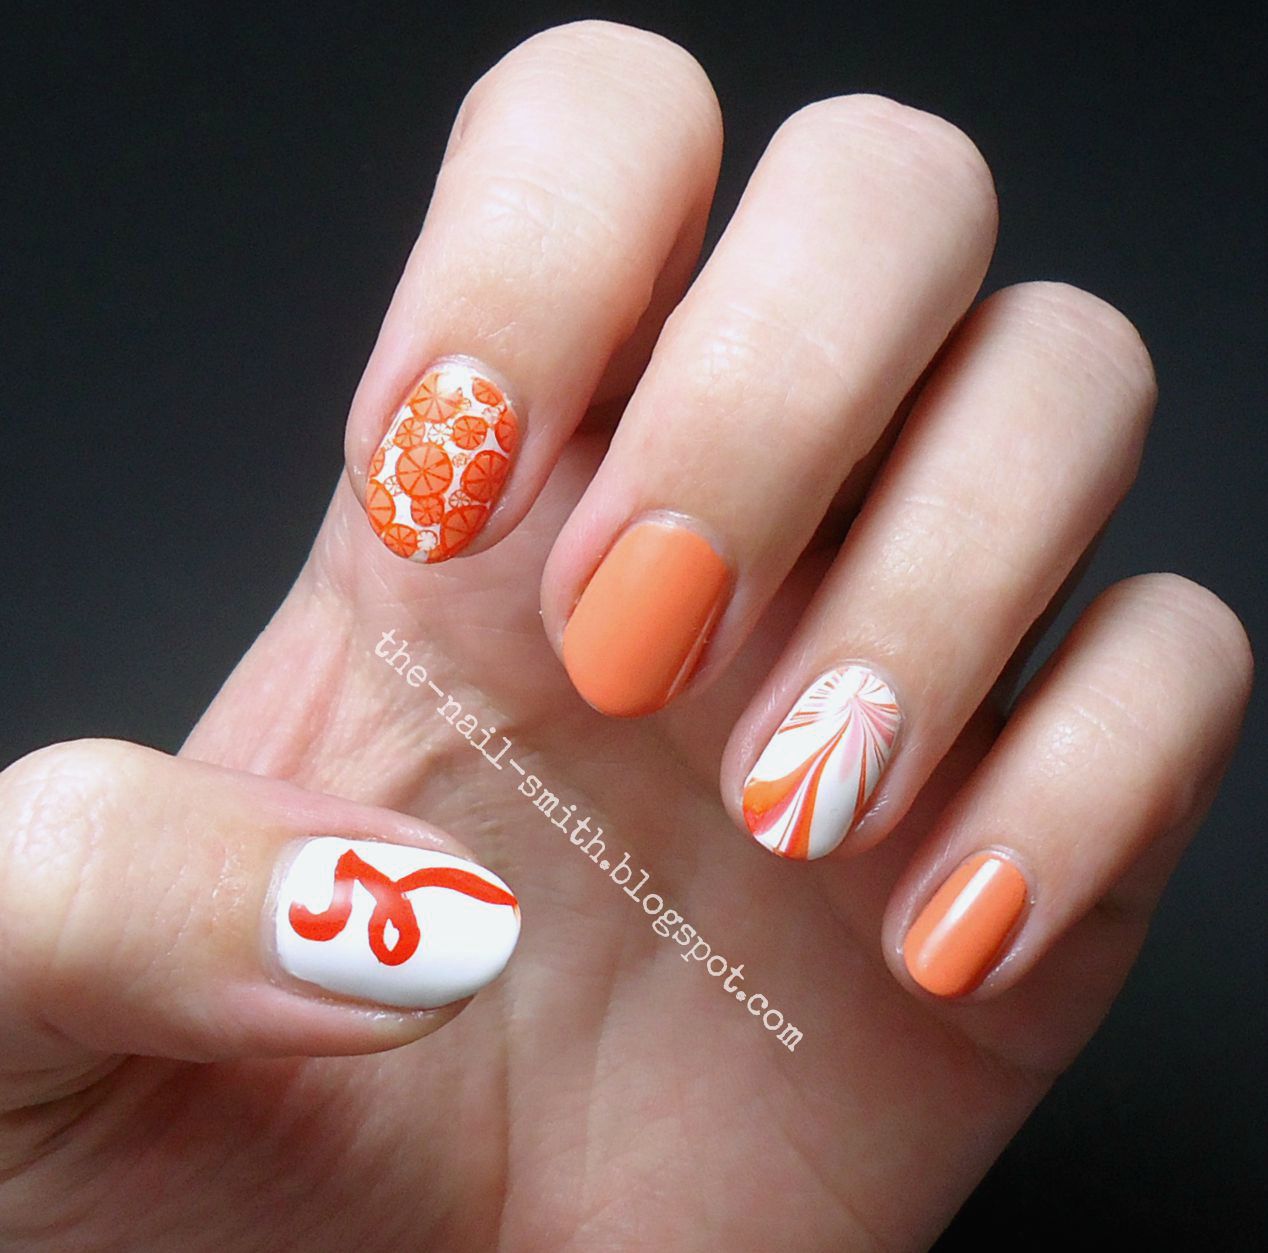 The Nail Smith: Summertime is Creamsicle Time!